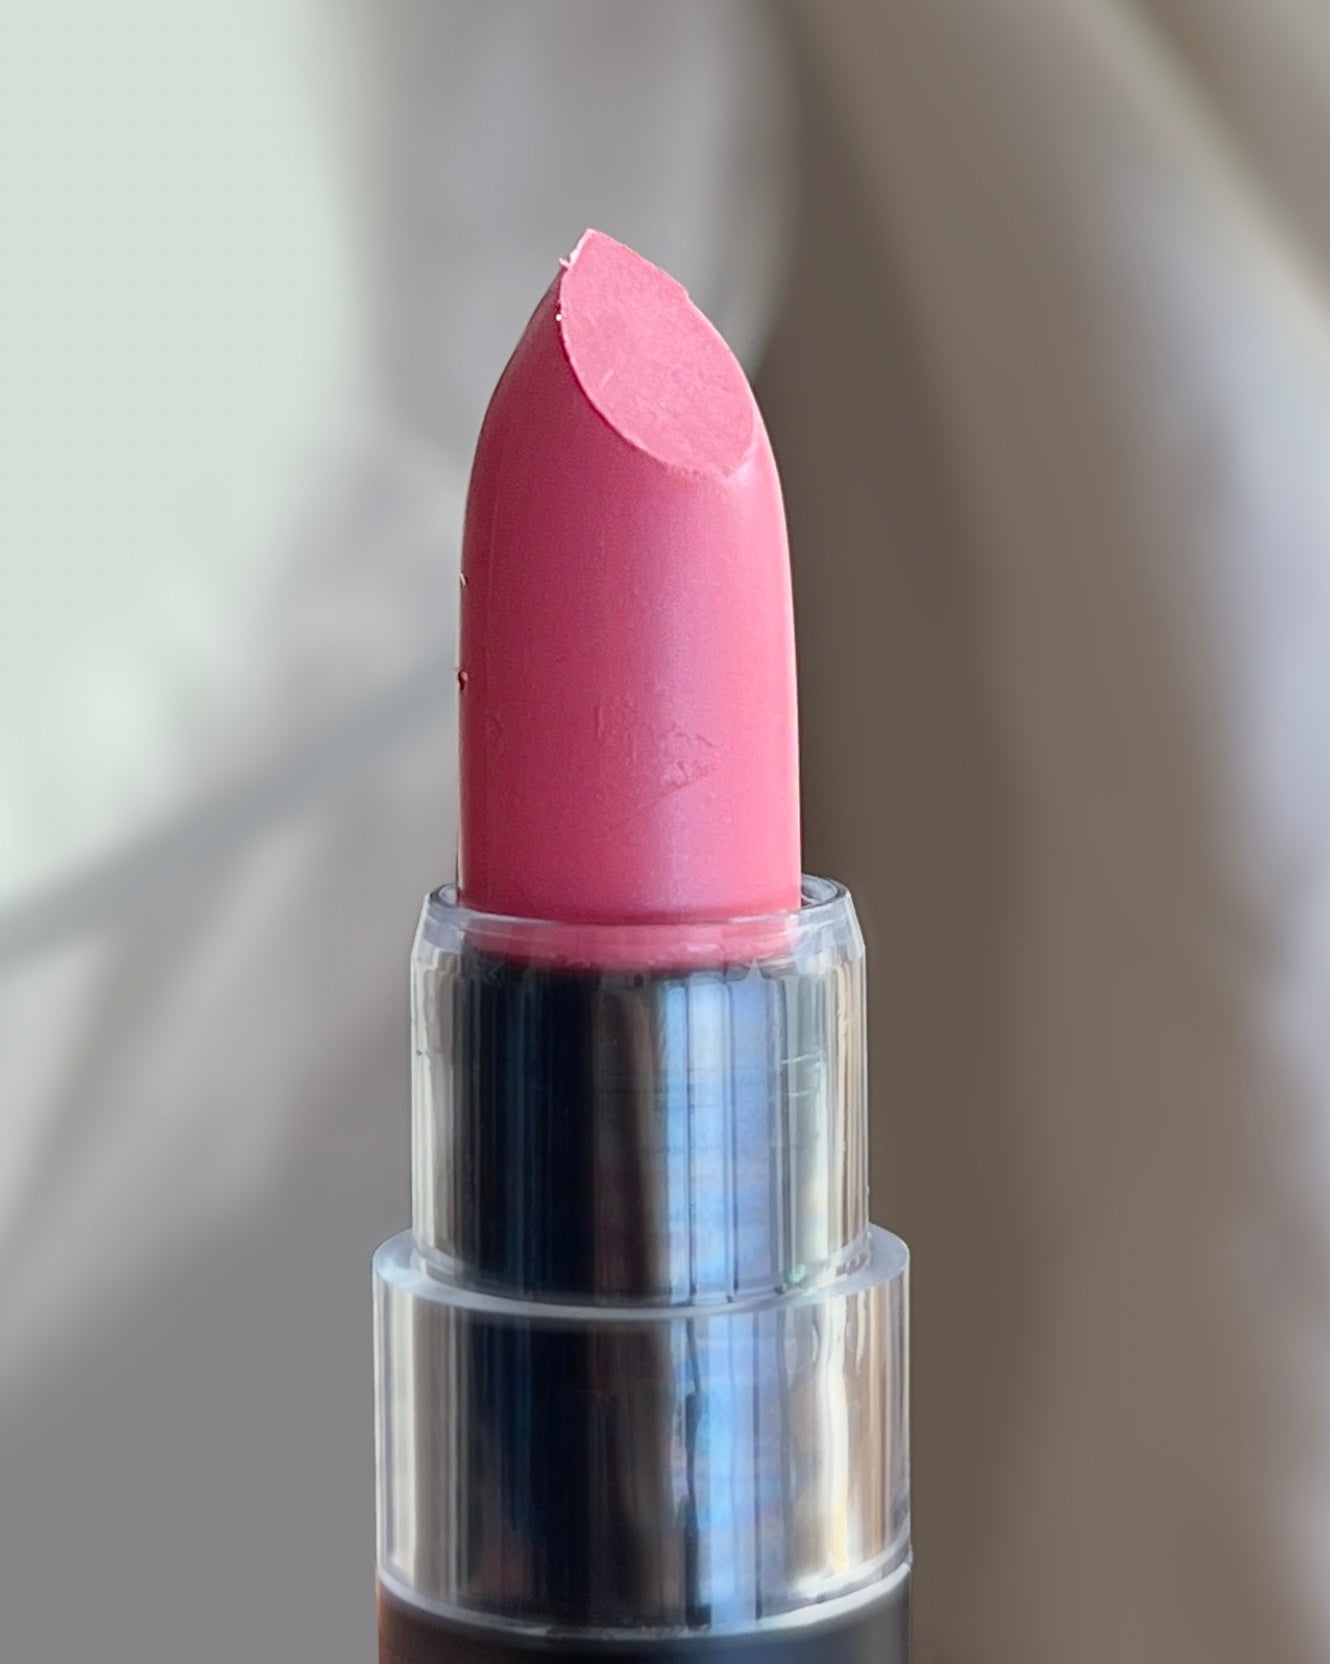 Luxe Nutrient-Rich Lipstick - Vegan, Talc-Free & More! – Heal Yes!